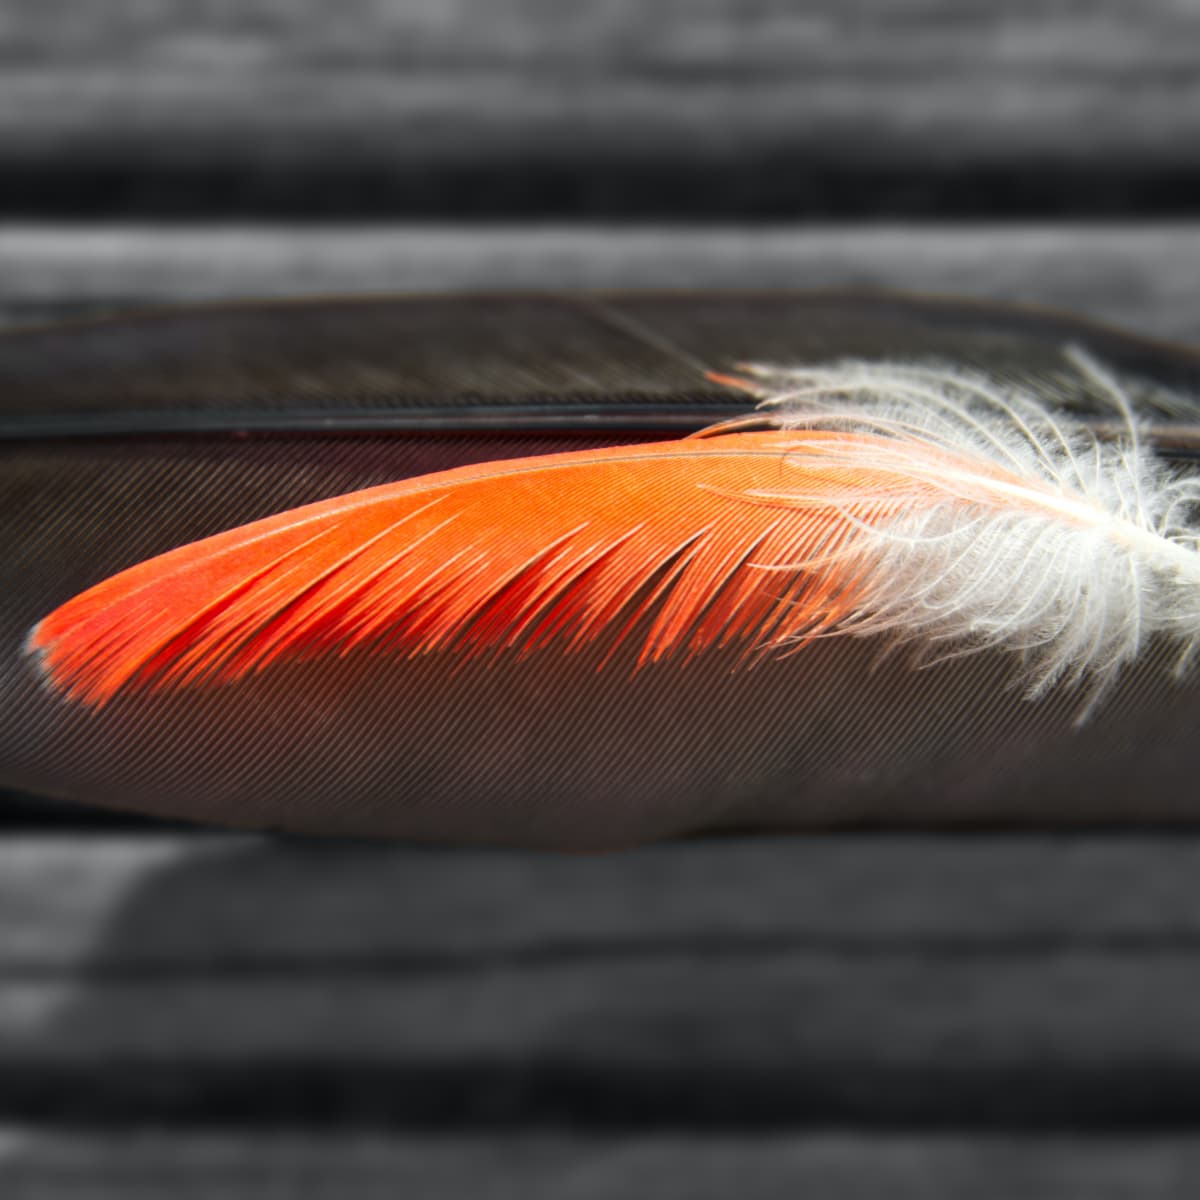 Blood Feathers in Birds: Pulling Feathers vs. Styptic Powder - PetHelpful